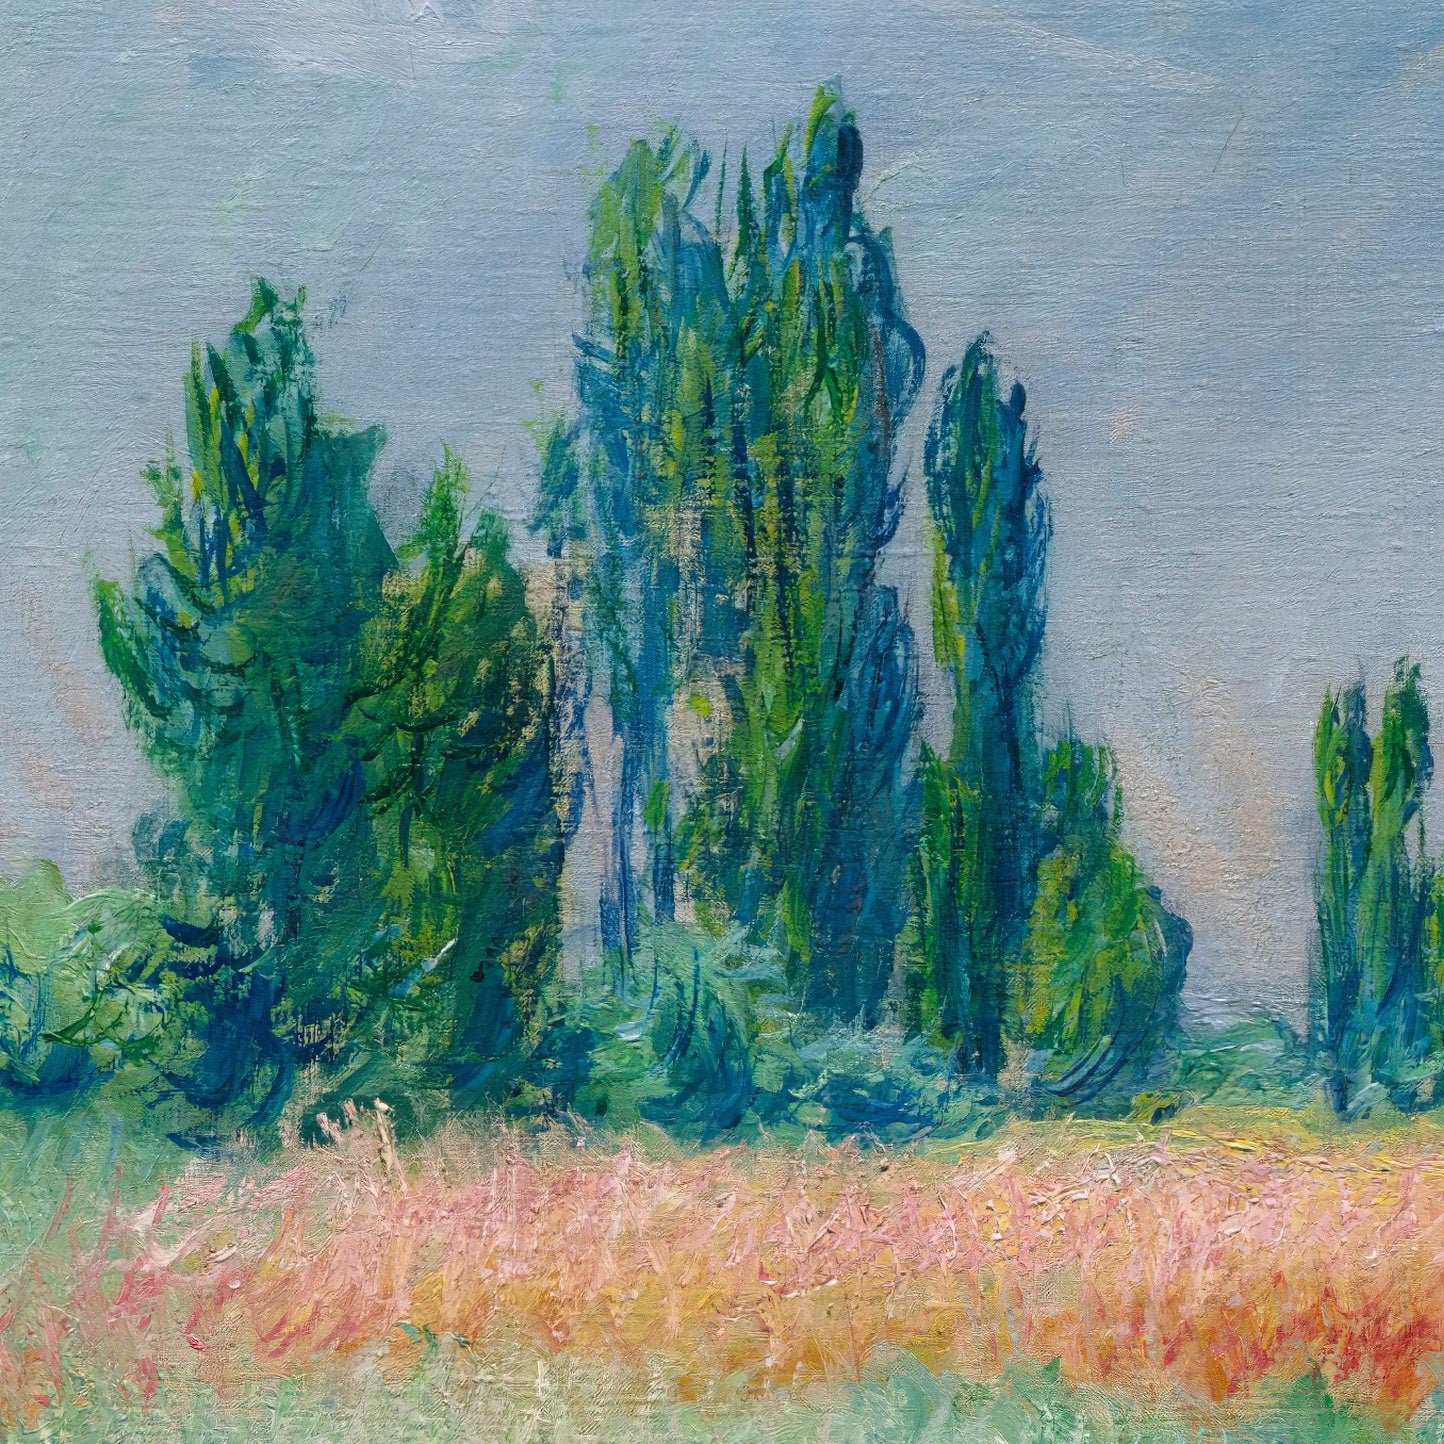 Champ De Blé by Claude monet, 3d Printed with texture and brush strokes looks like original oil-painting, code:550